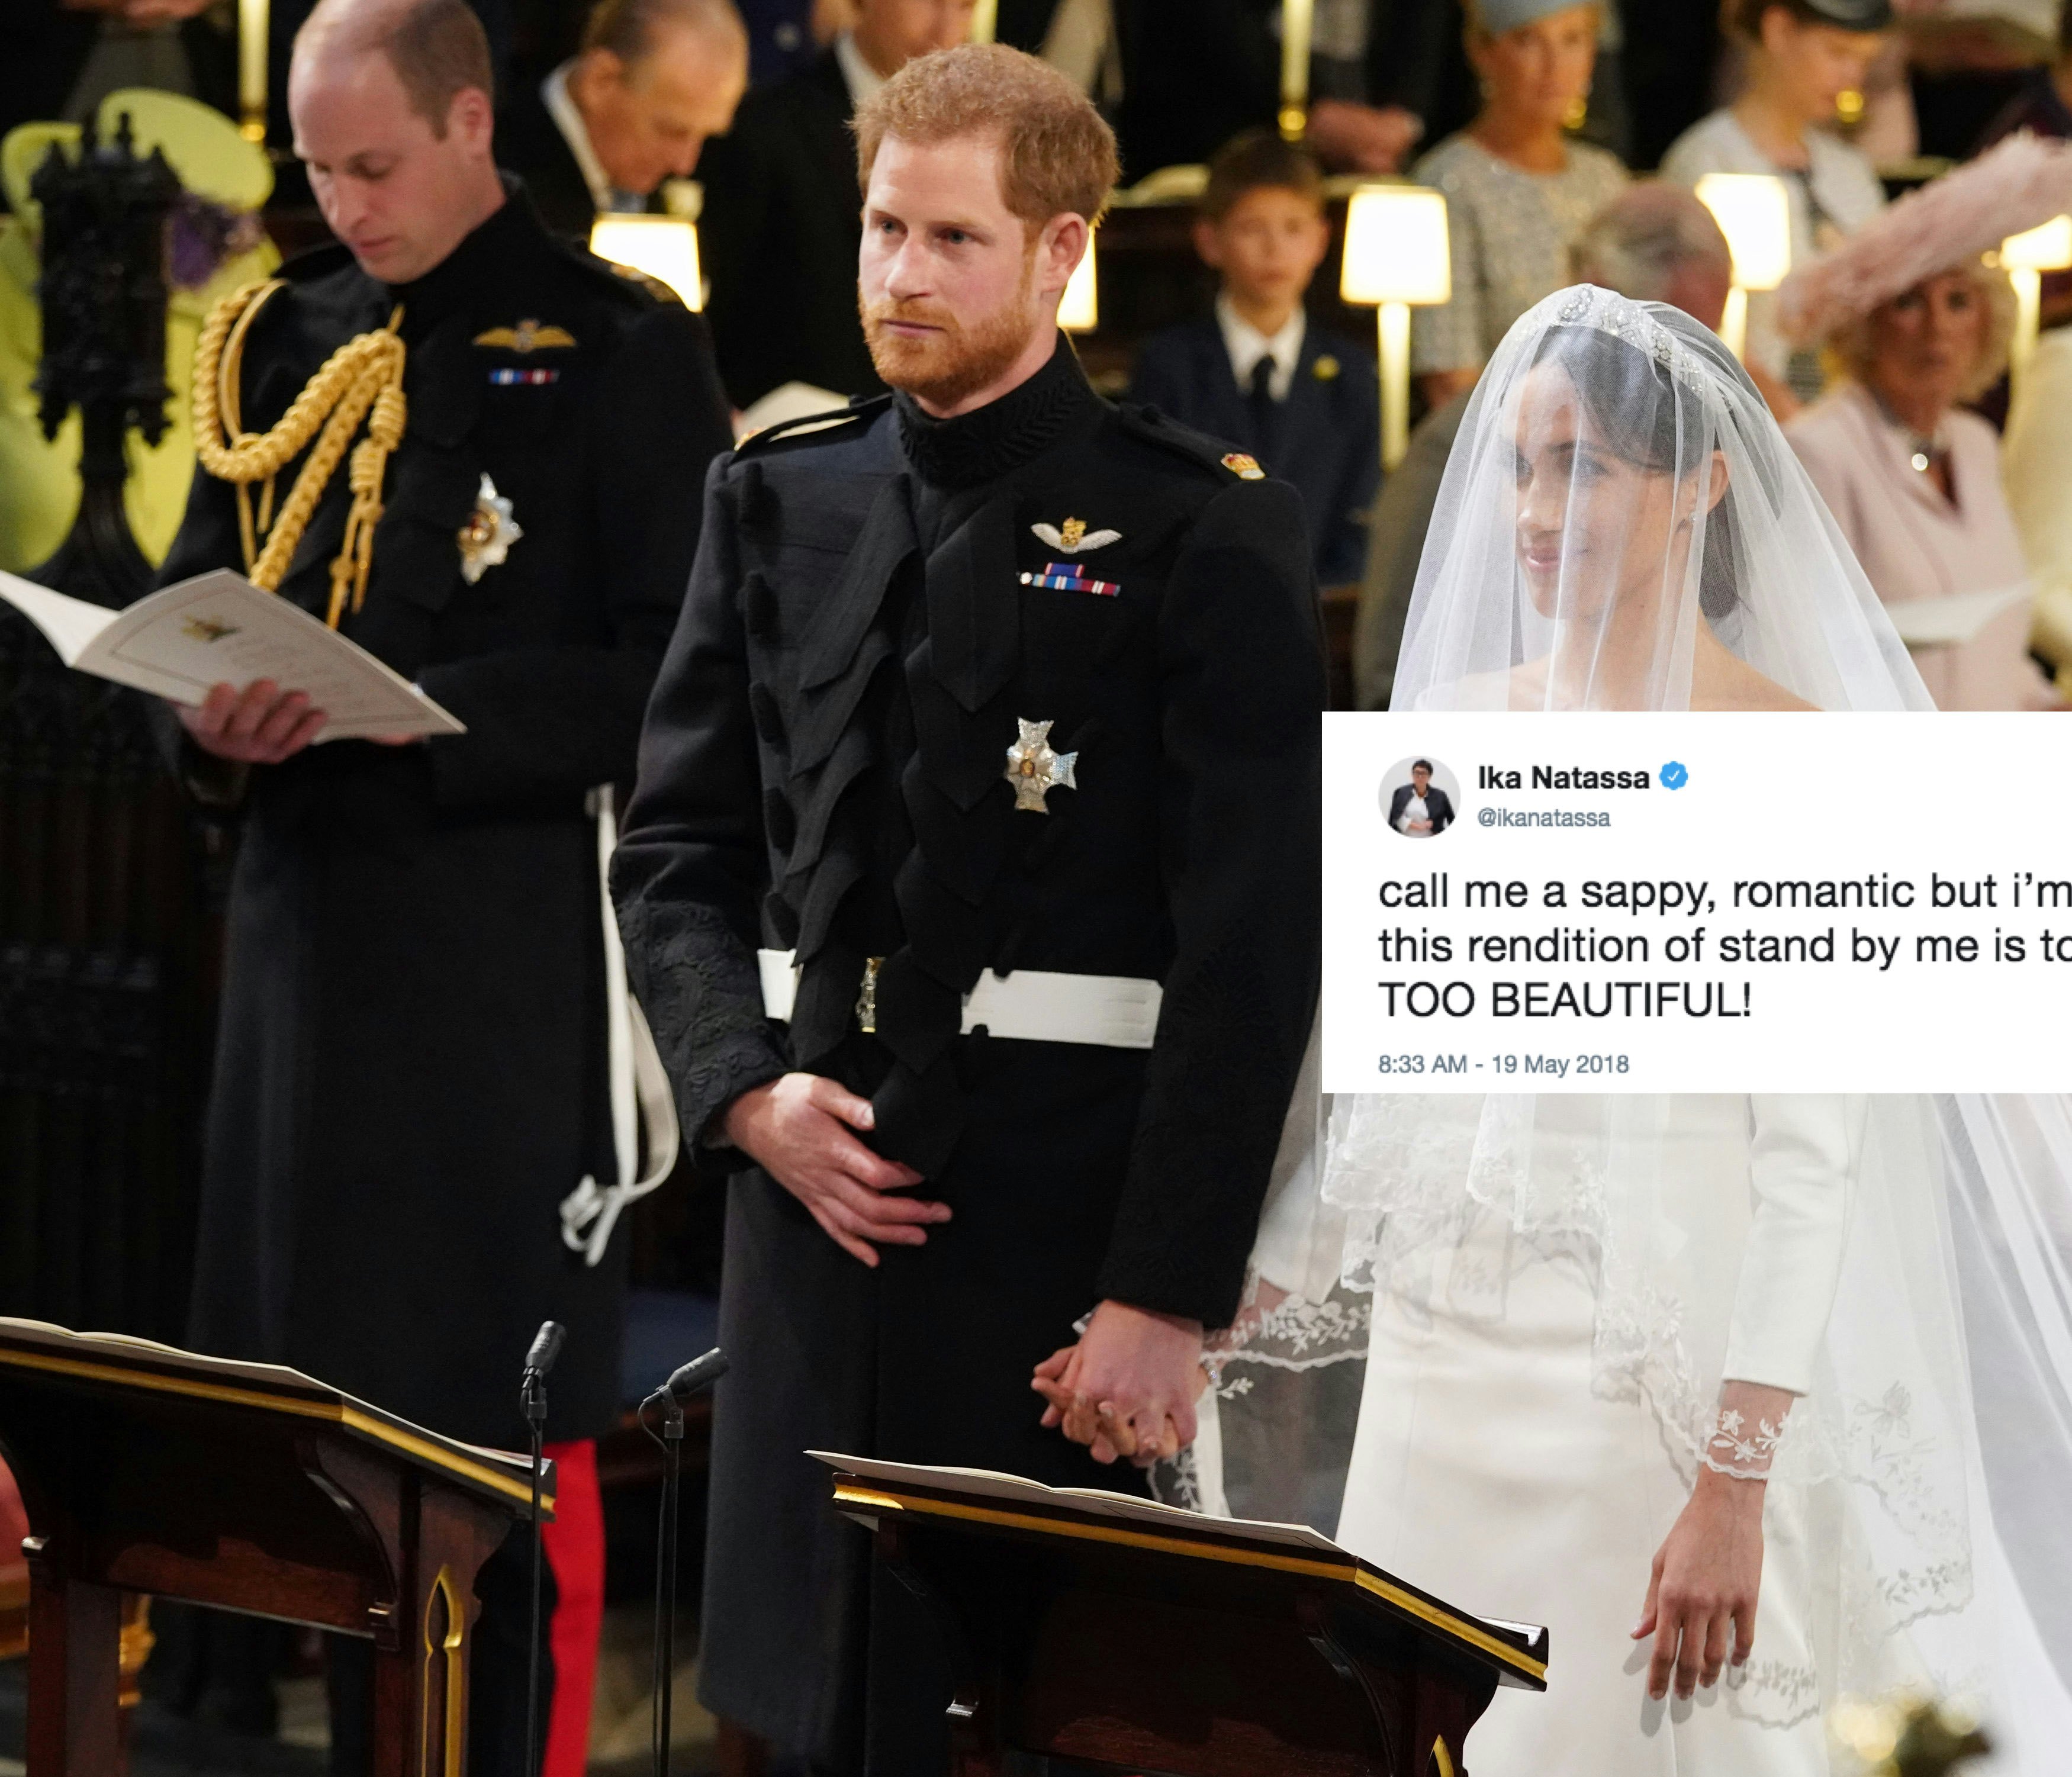 Image for the royal wedding twitter